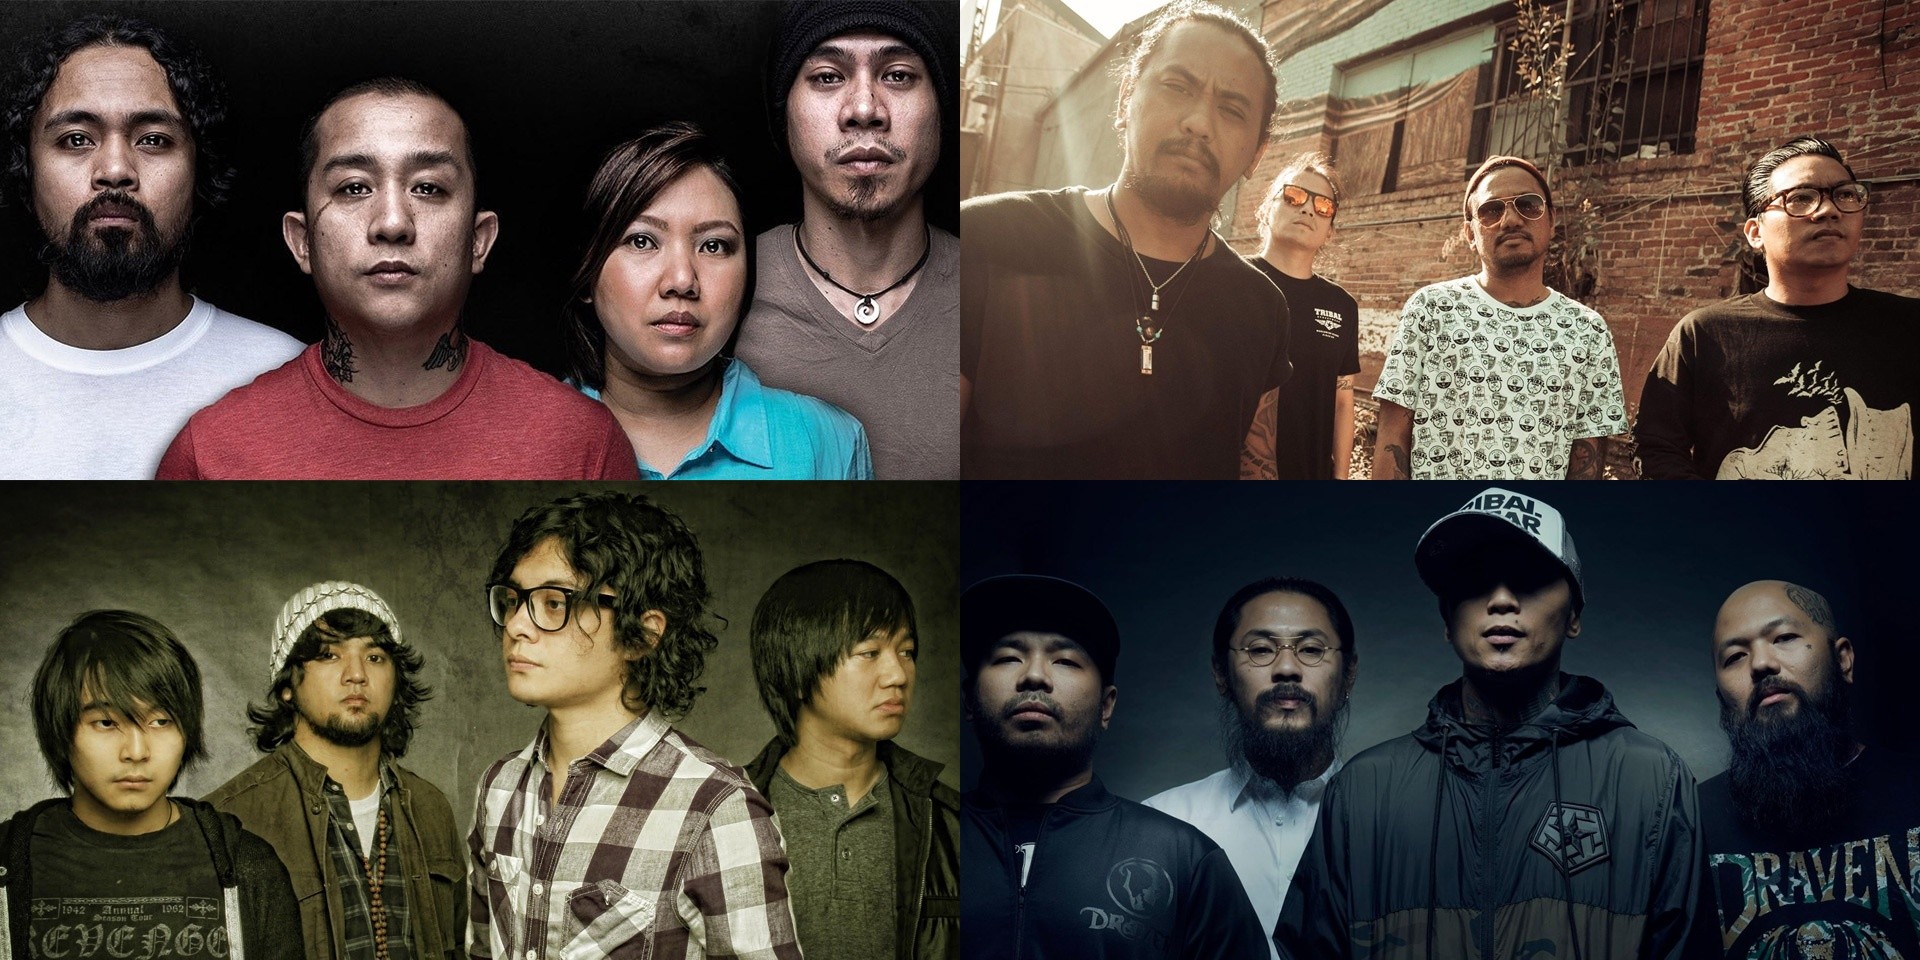 Urbandub, Typecast, Salamin, Wilabaliw, and more to perform at Threadfest 2019